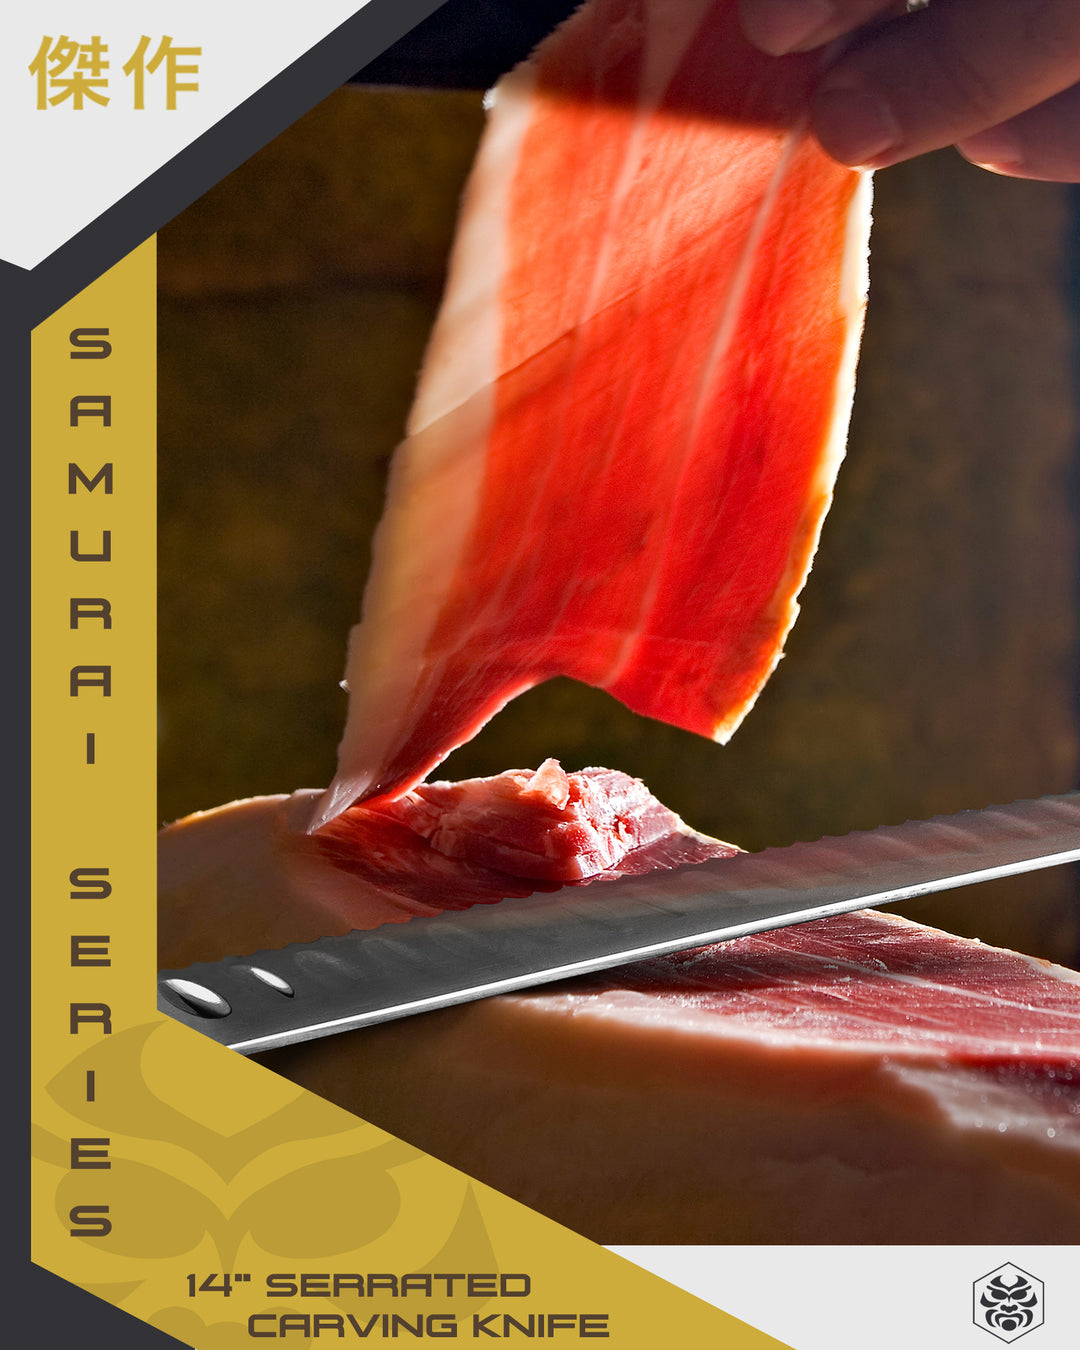 A slice of jamon thin enough to see light passing through it thanks to the Samurai Serrated Carving Knife